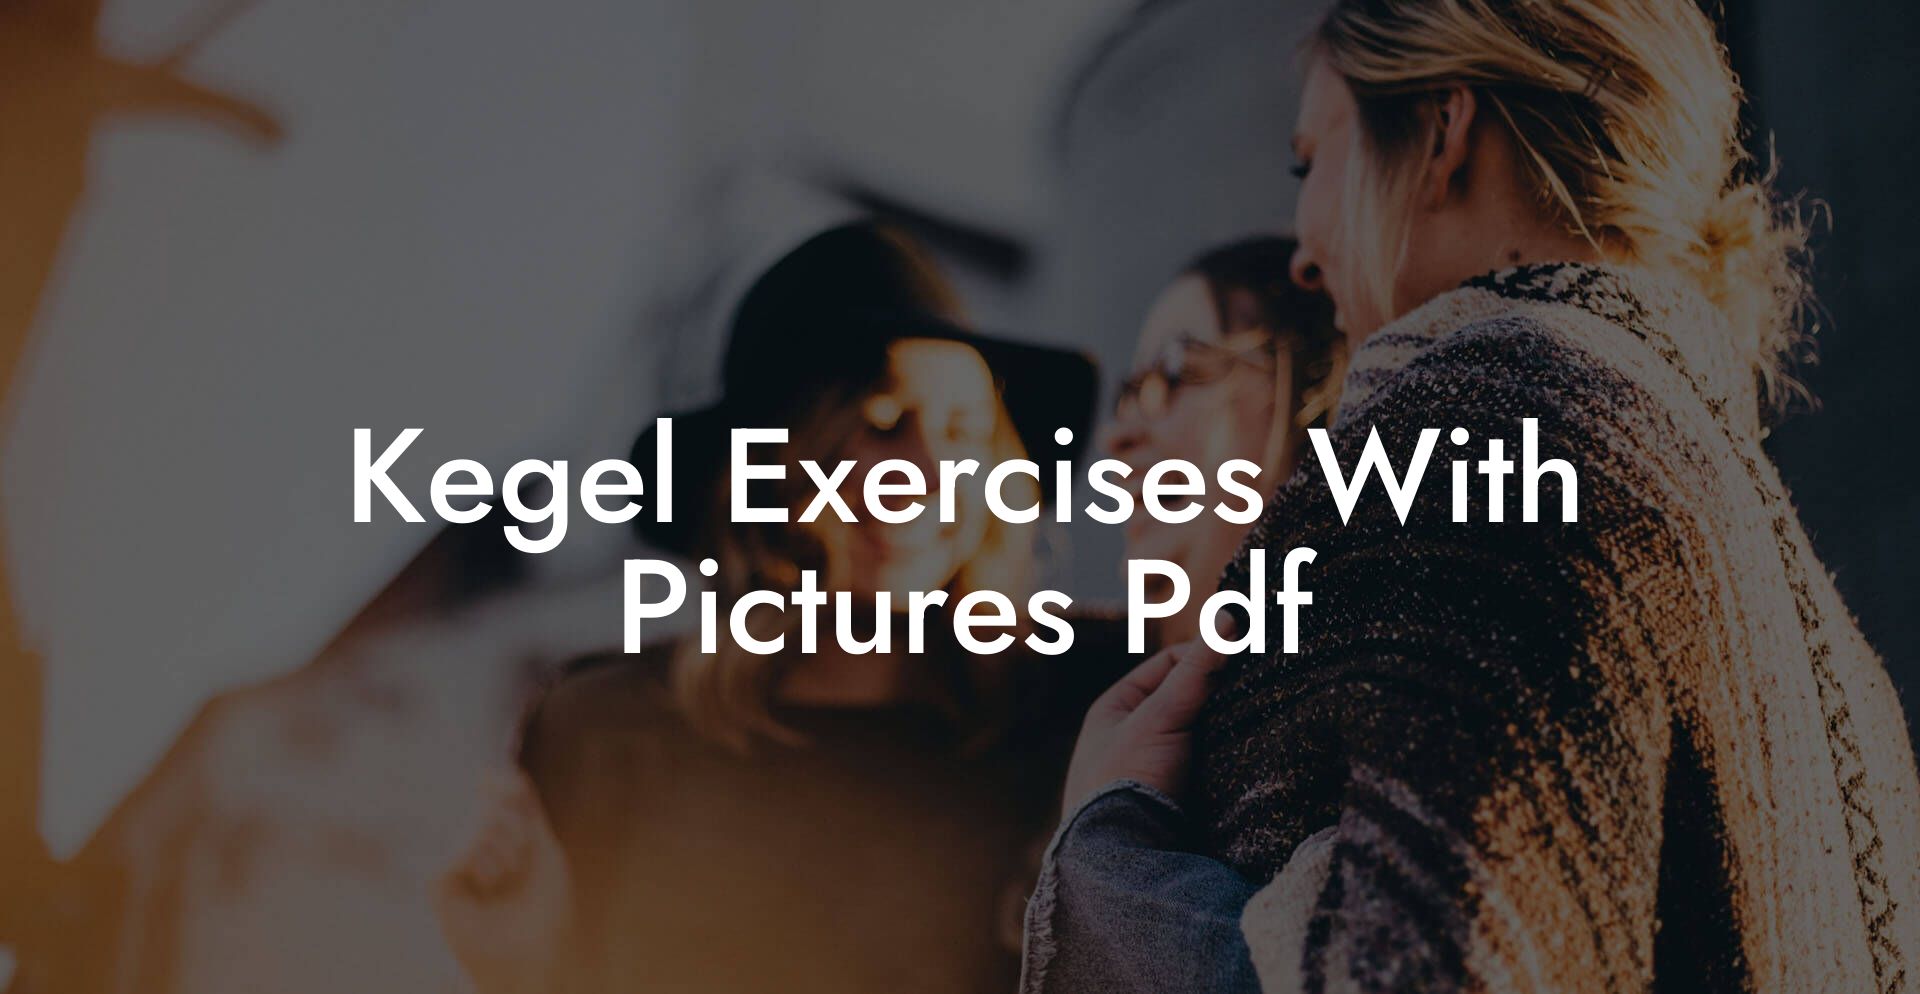 Kegel Exercises With Pictures Pdf